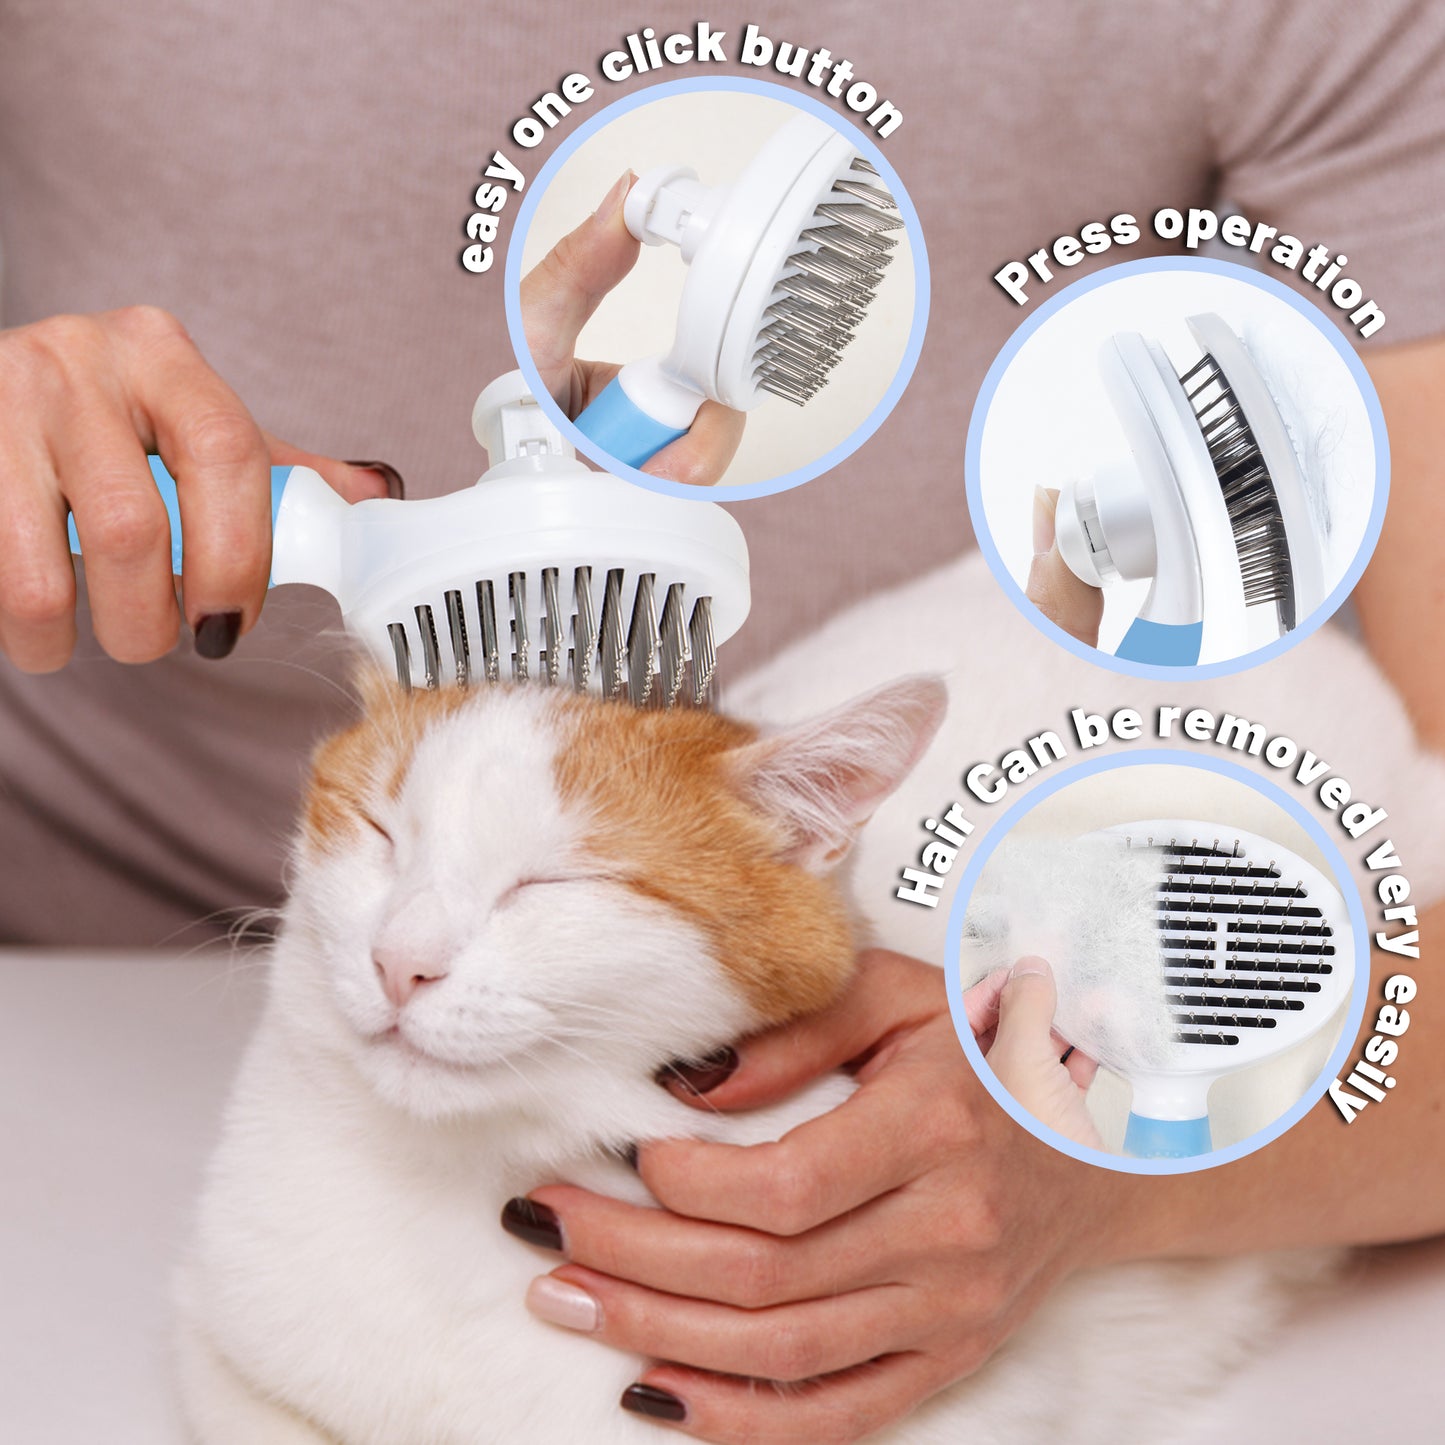 Self-Cleaning Brush for Cats: A revolutionary grooming solution with soft bristles. Easy maintenance and reduced shedding. A happy, well-groomed cat awaits